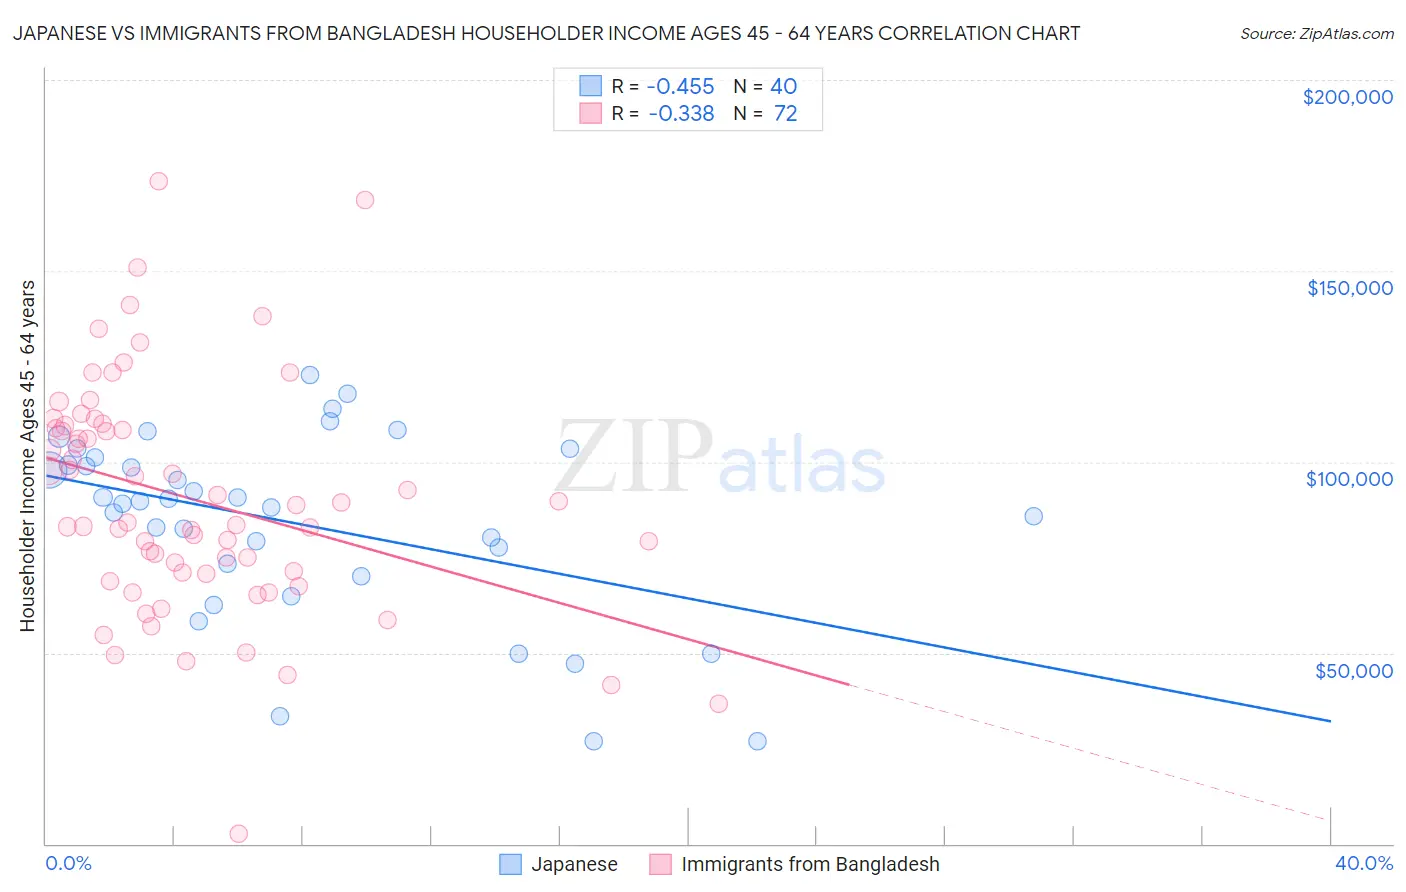 Japanese vs Immigrants from Bangladesh Householder Income Ages 45 - 64 years